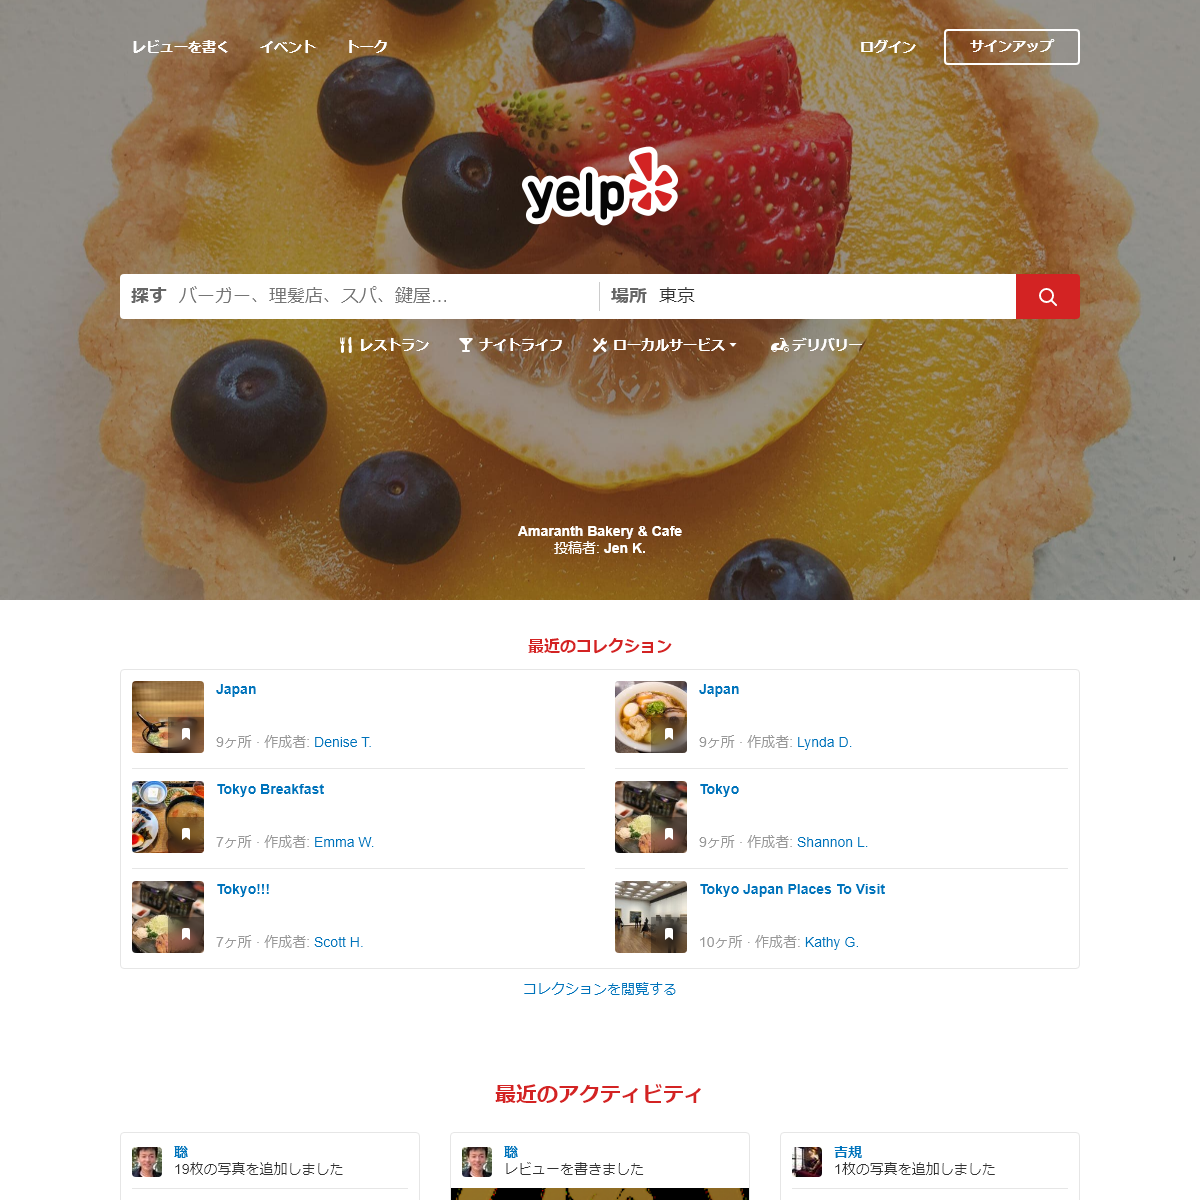 A complete backup of yelp.co.jp